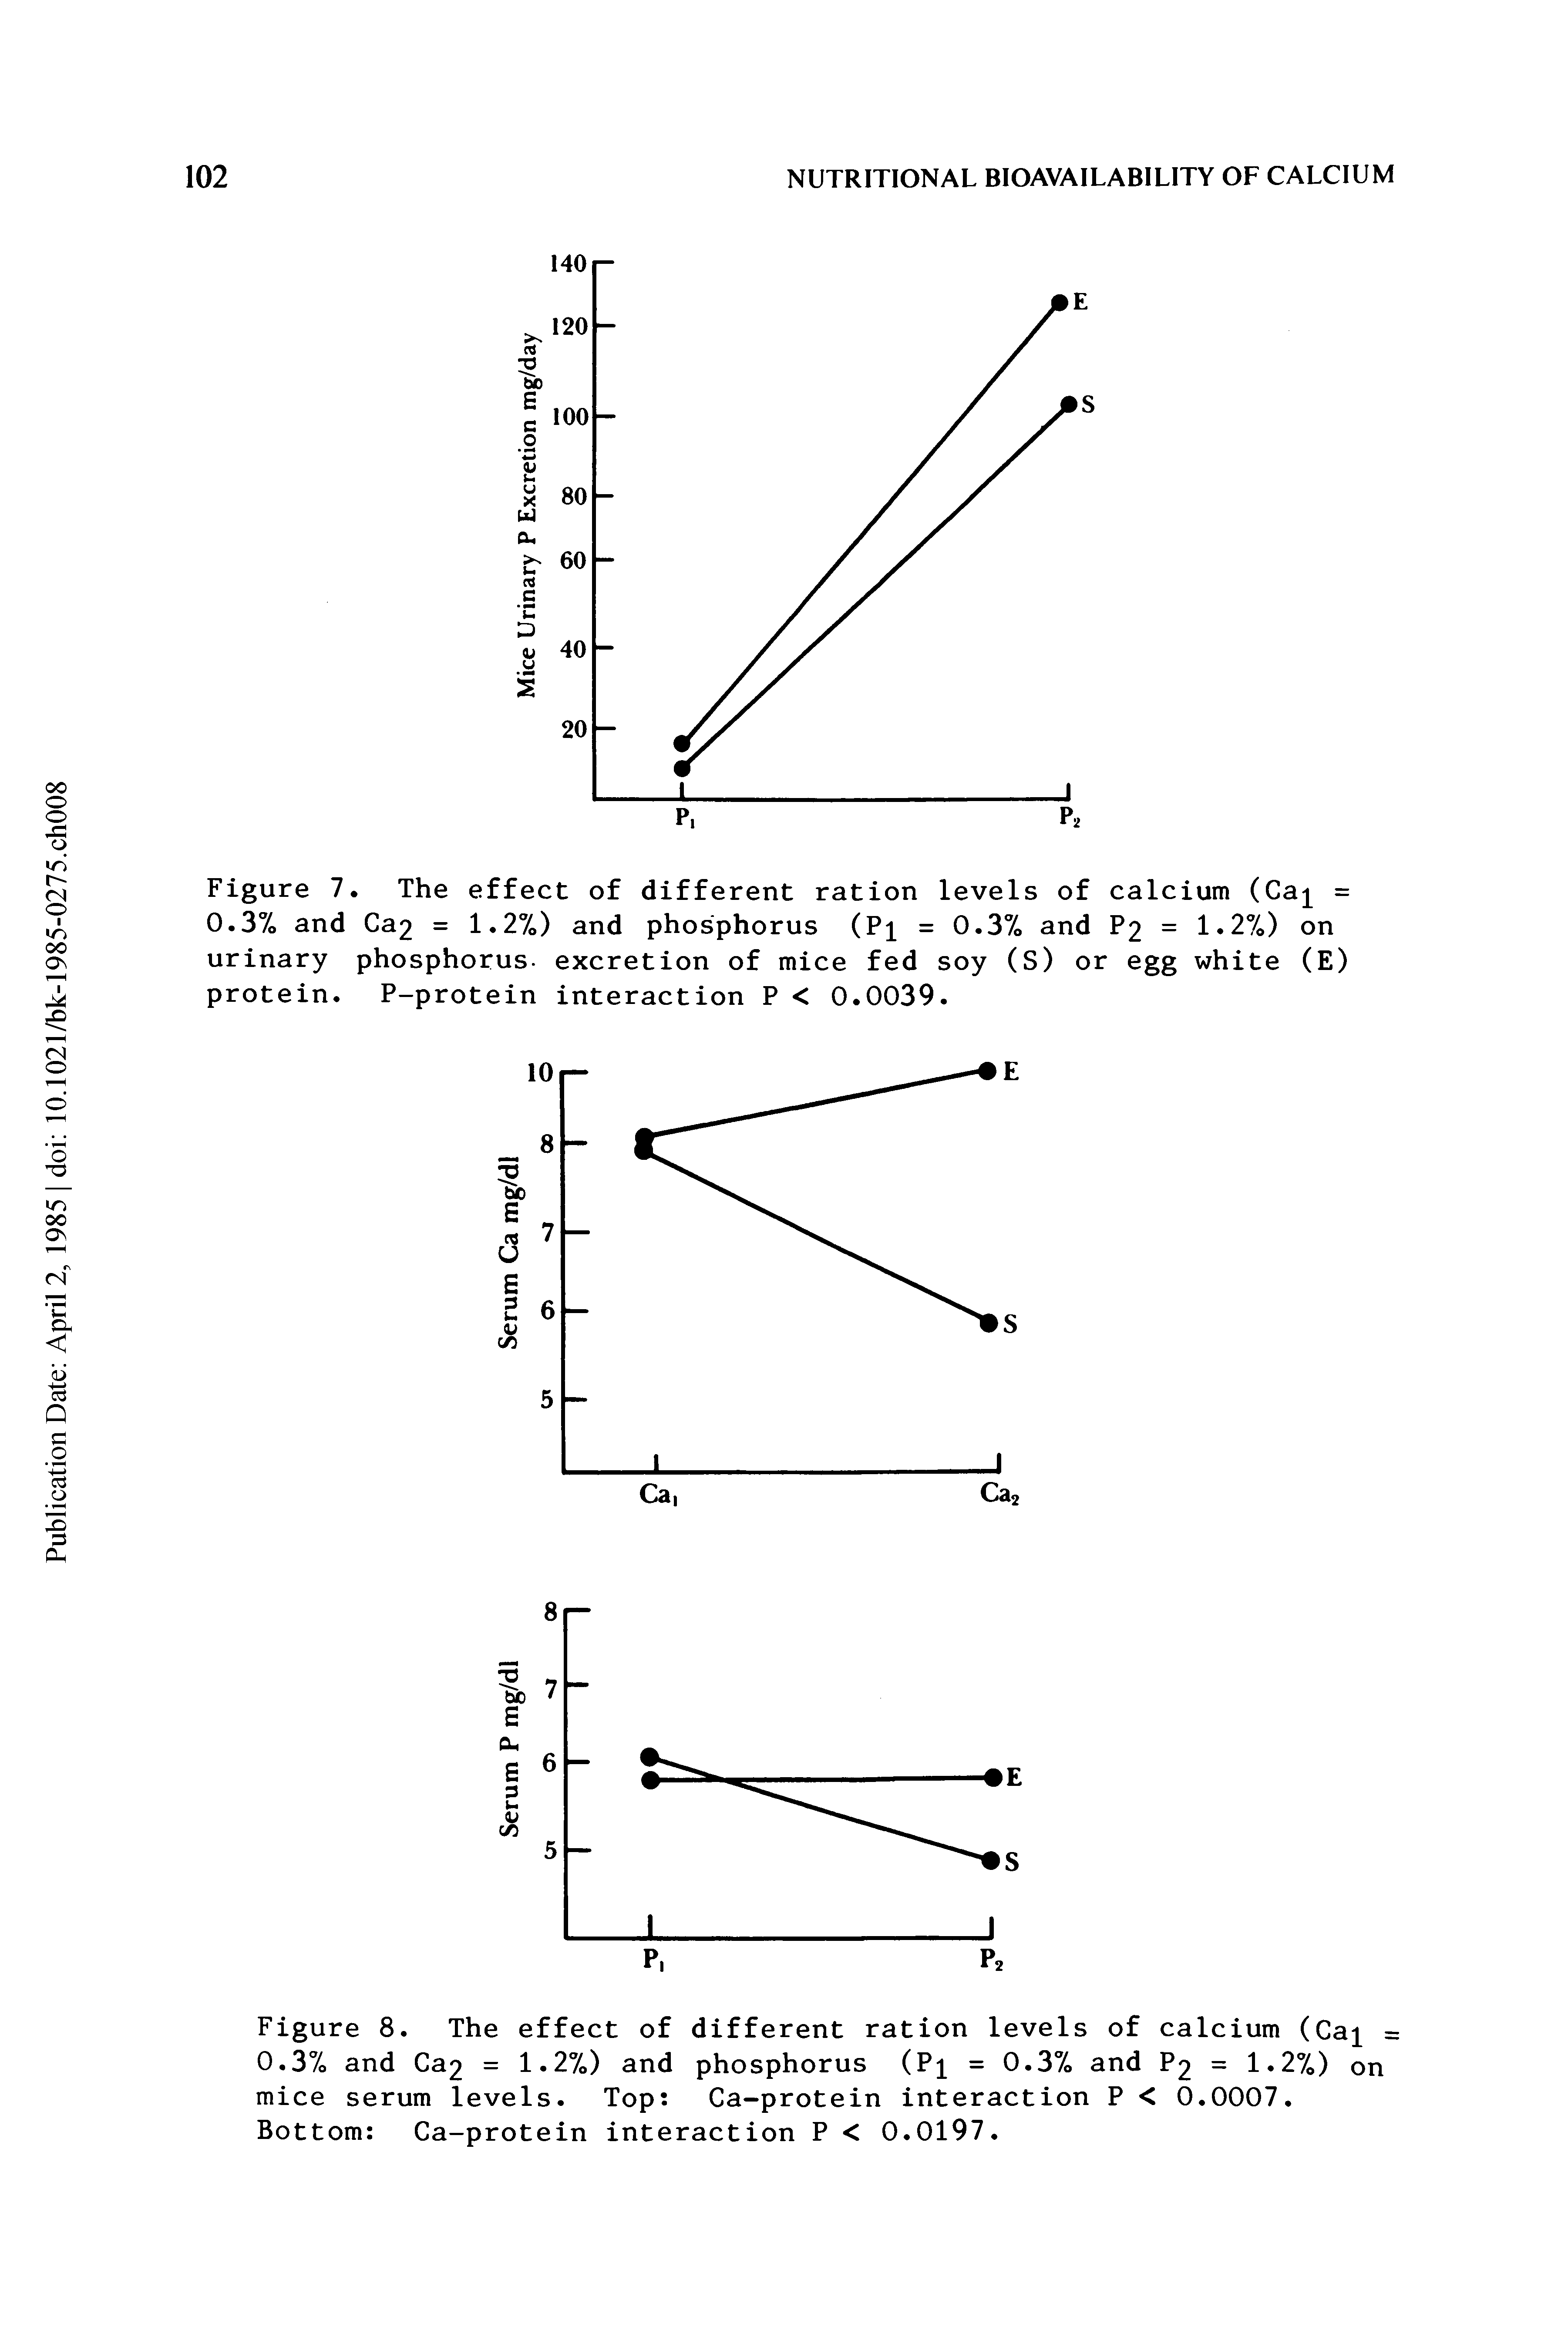 Figure 7. The effect of different ration levels of calcium (Ca = O.37o and Ca = 1.27o) and phosphorus (Pi = 0.37> and P2 = 1.27 ) on urinary phosphorus- excretion of mice fed soy (S) or egg white (E) protein. P-protein interaction P < 0.0039.